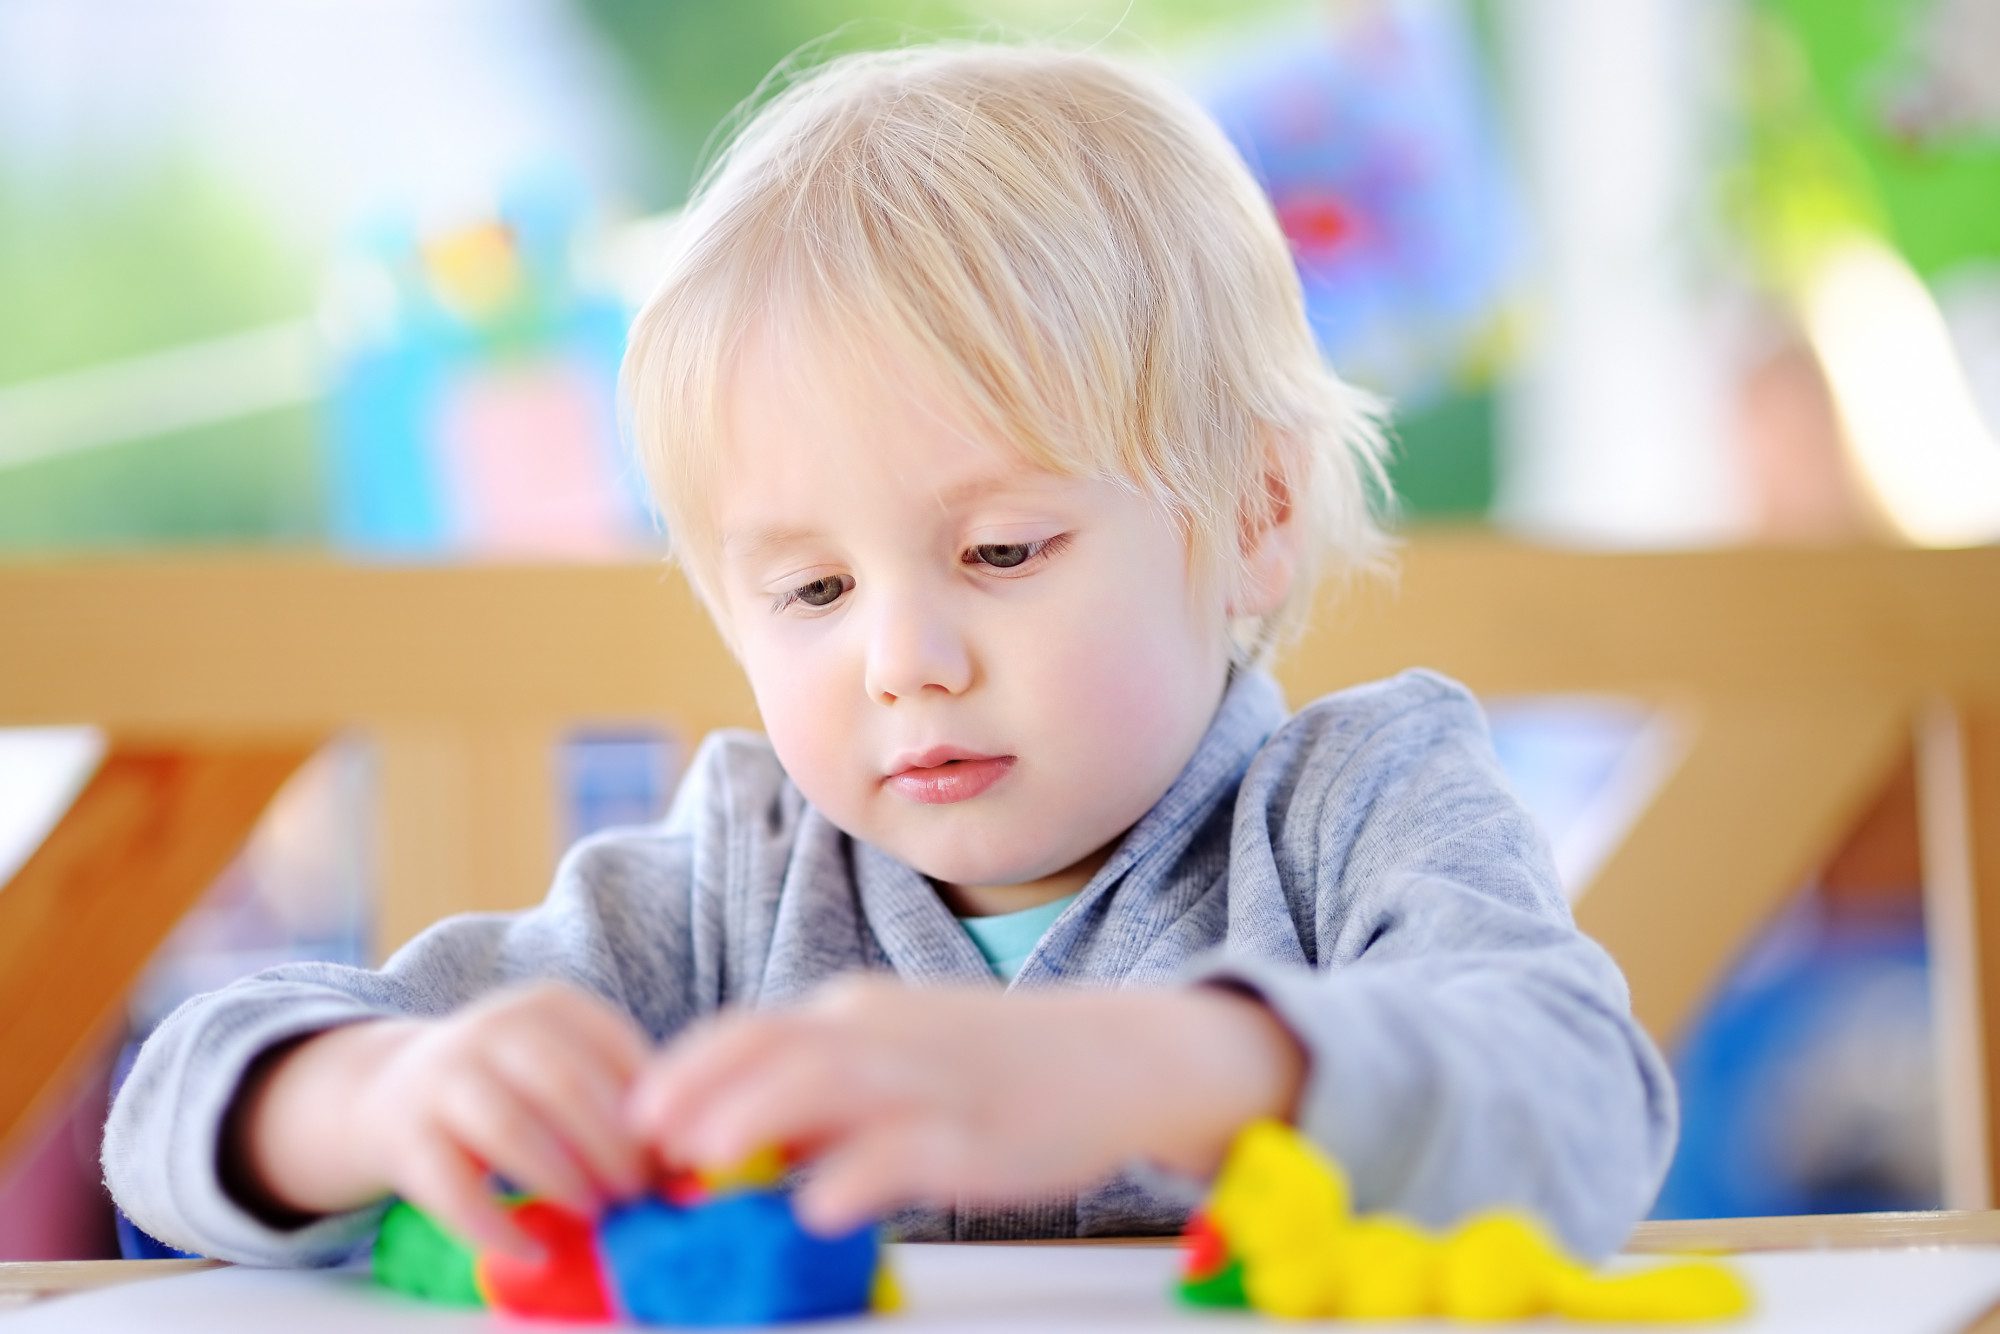 5 Signs Your Child May Have Autism